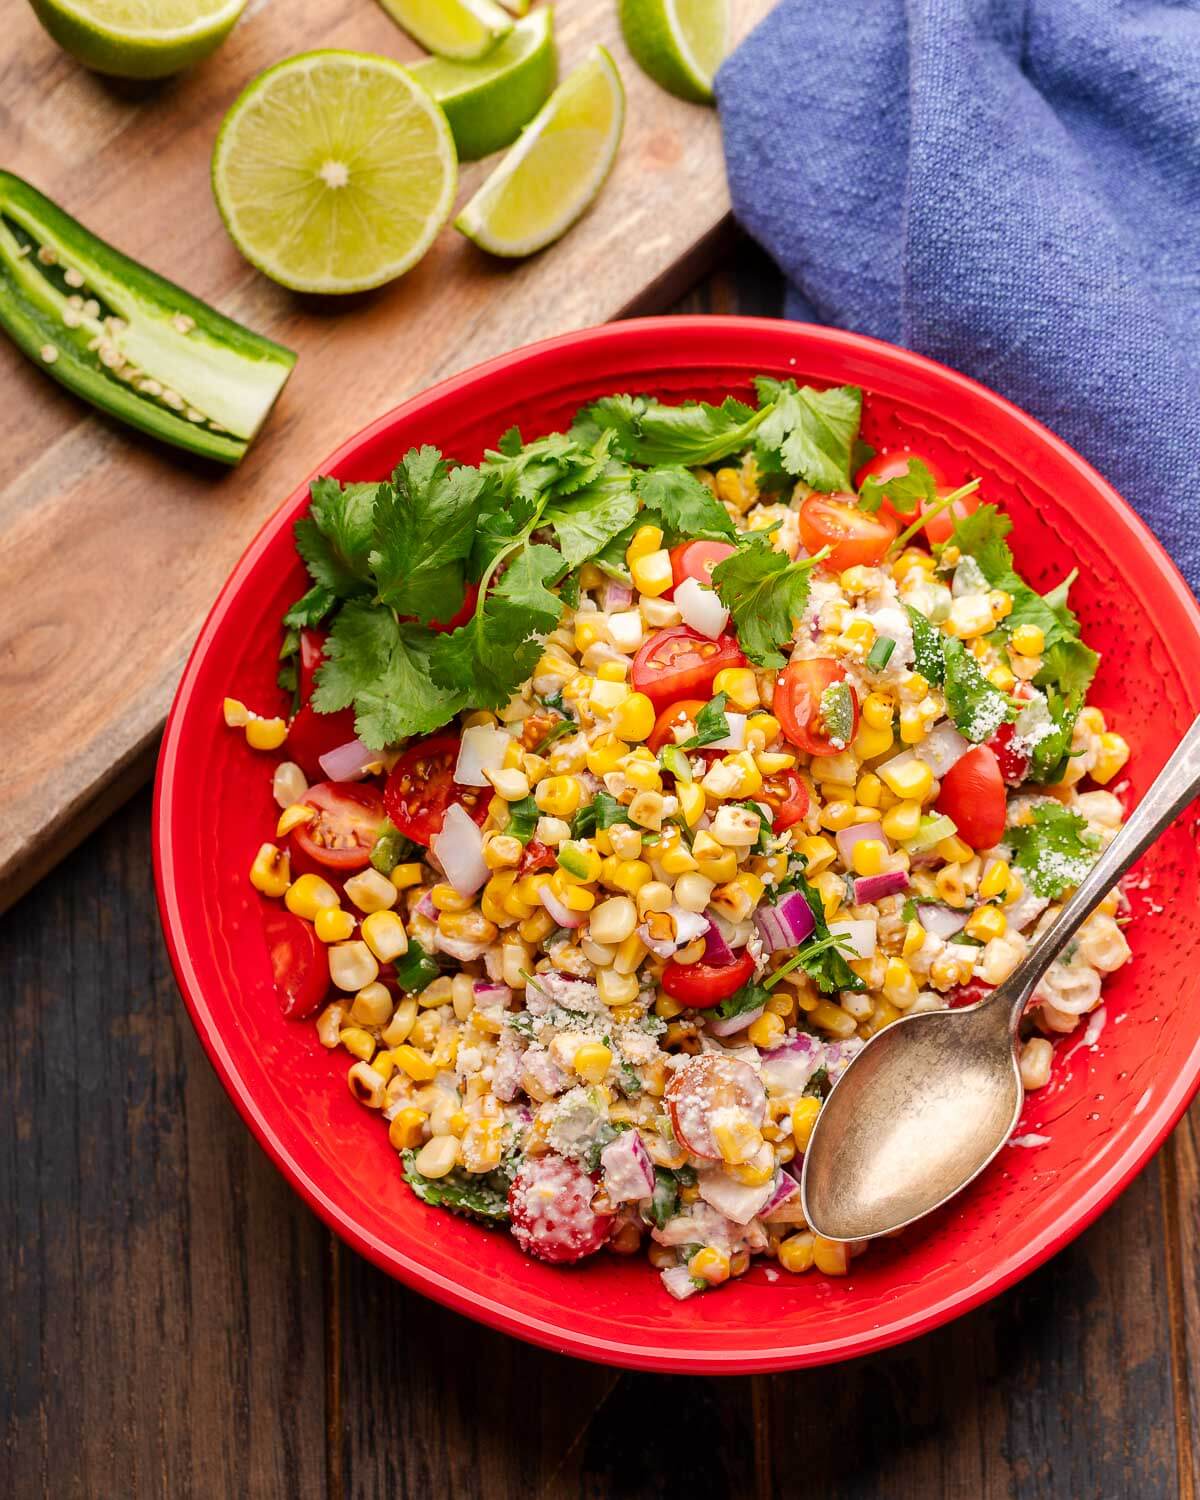 Red bowl of street corn salad with blue napkin and limes and jalapenos on cutting board.